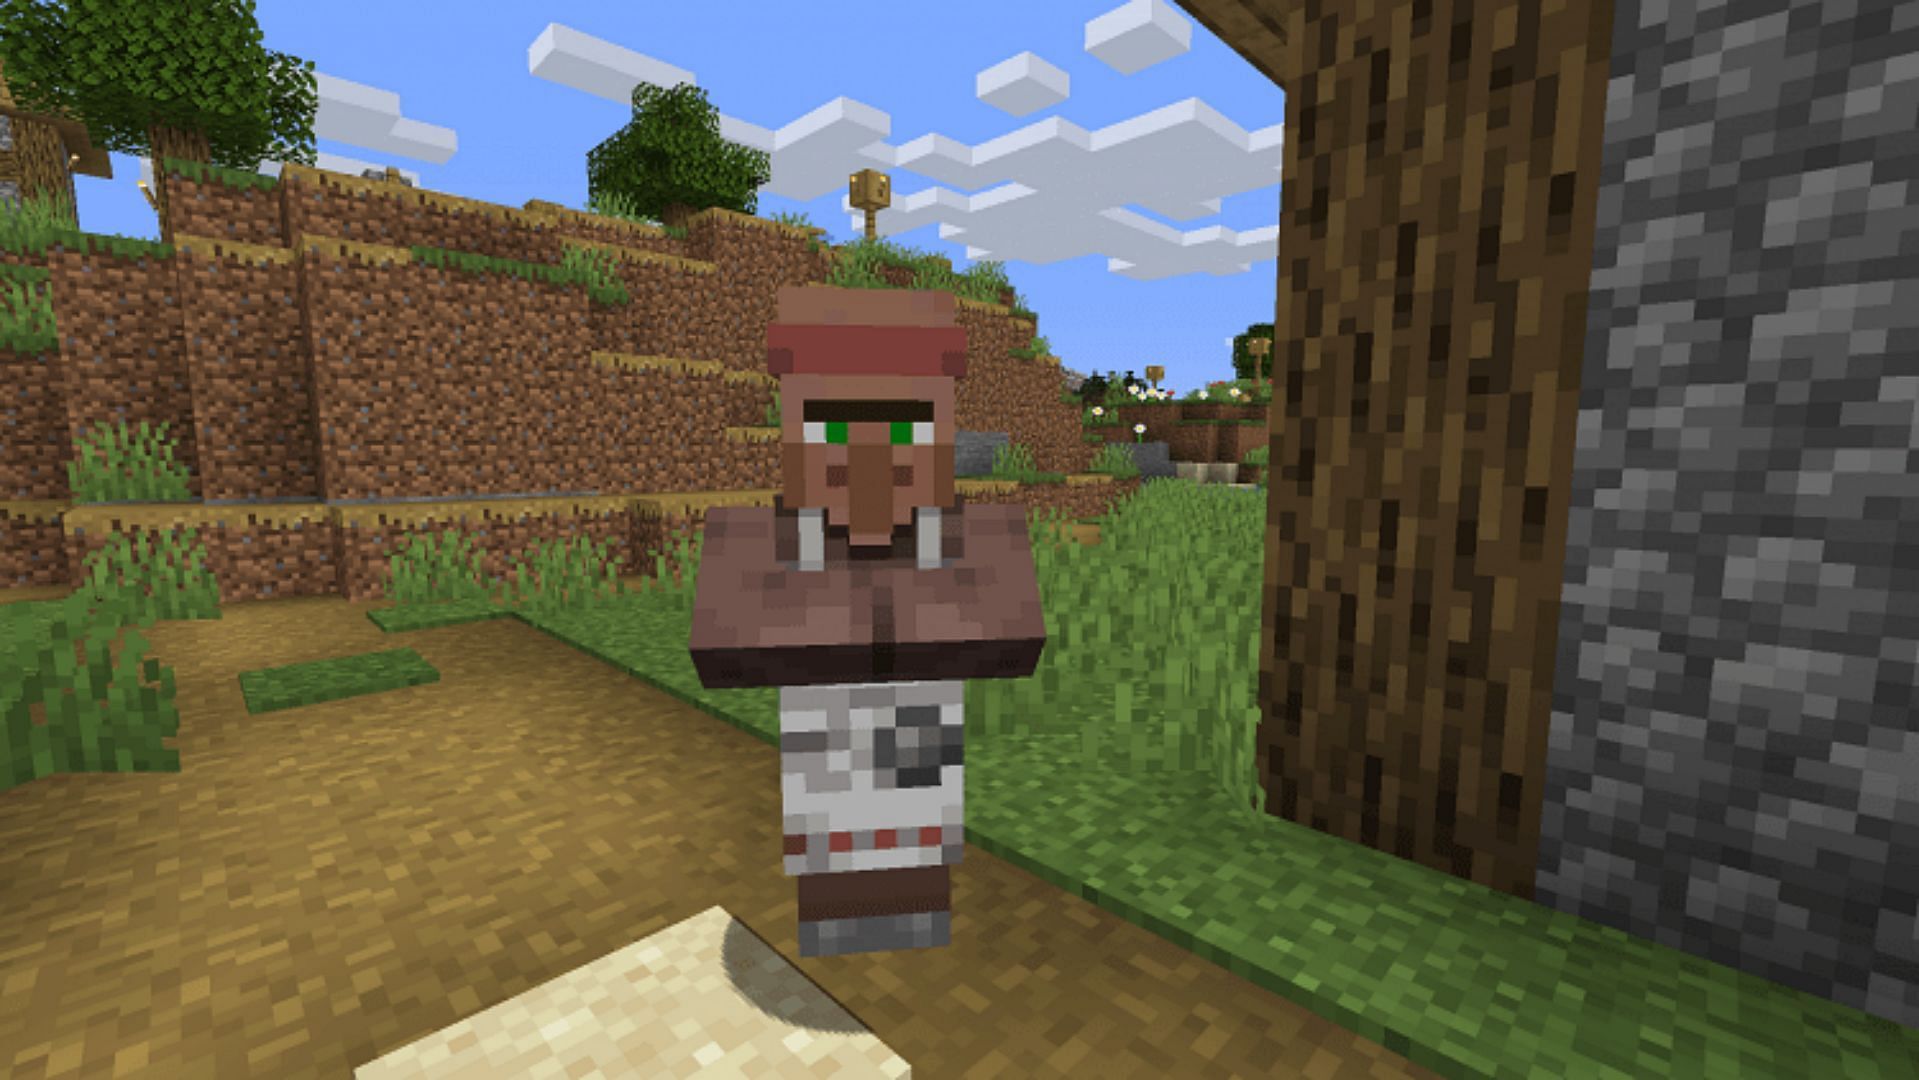 Since players need food items, it is quite useless to trade for some emeralds in Minecraft 1.19 (Image via Mojang)